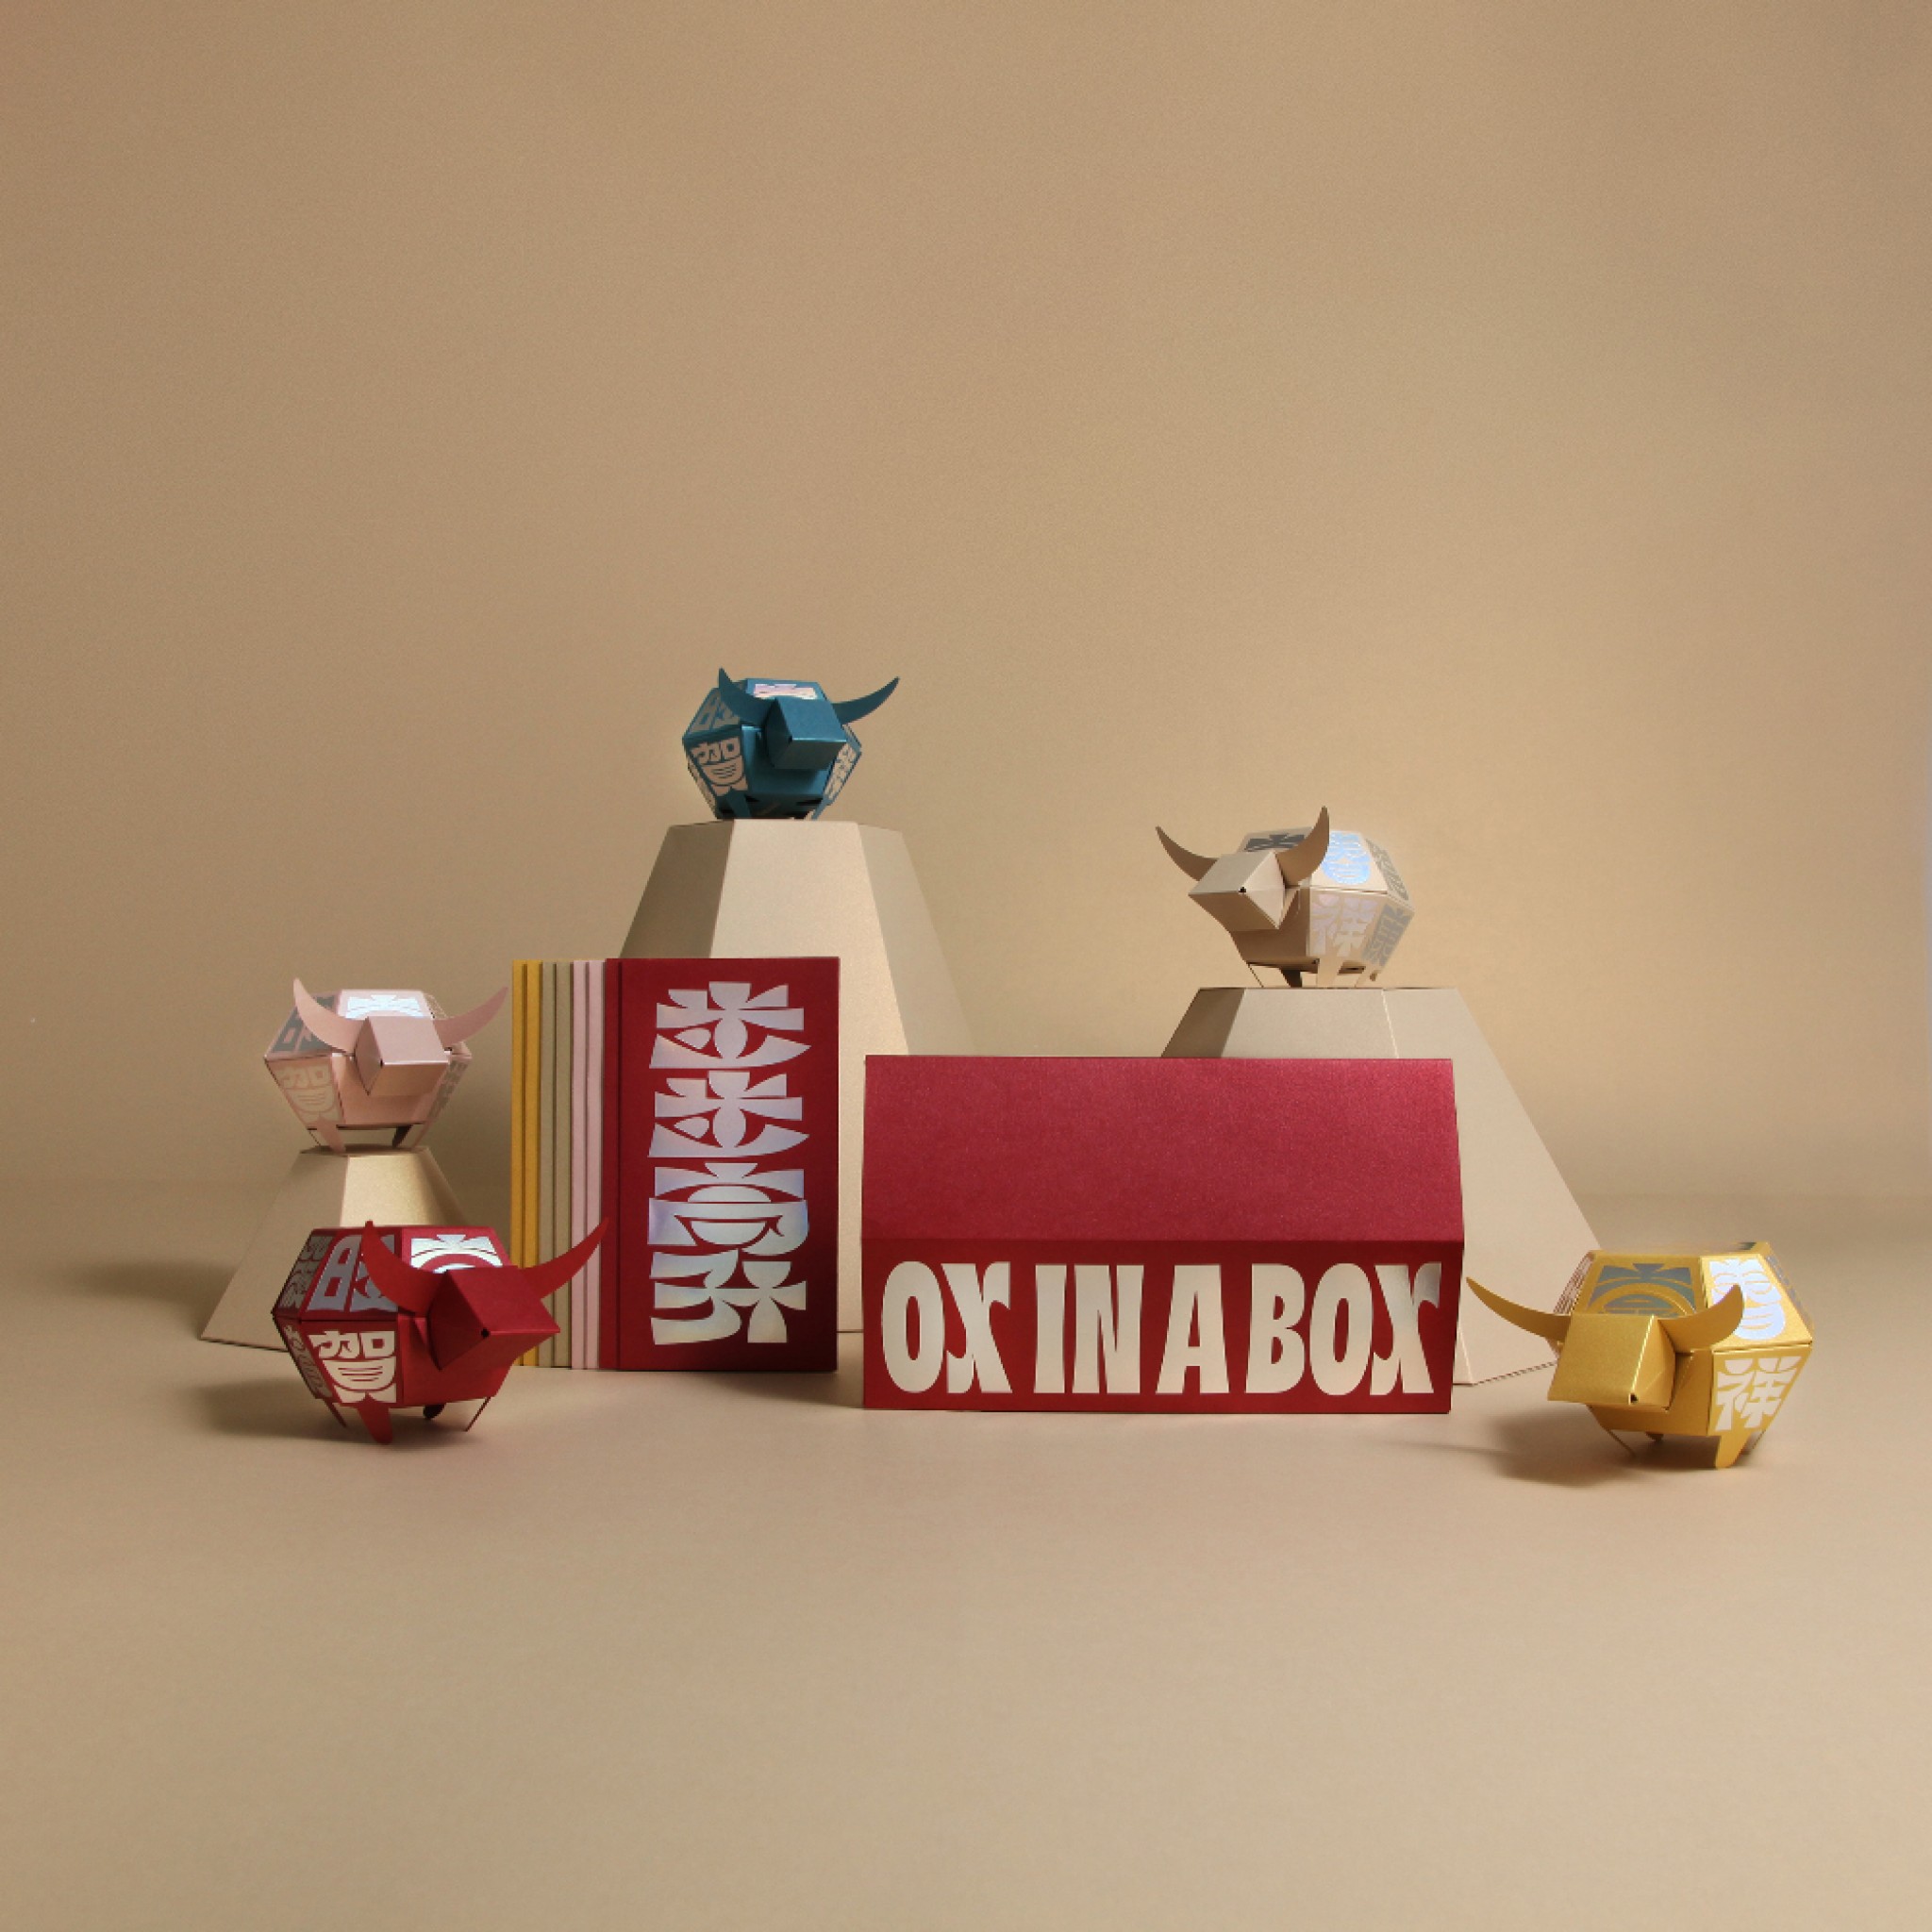 Ox in a Box by Fictionist Studio